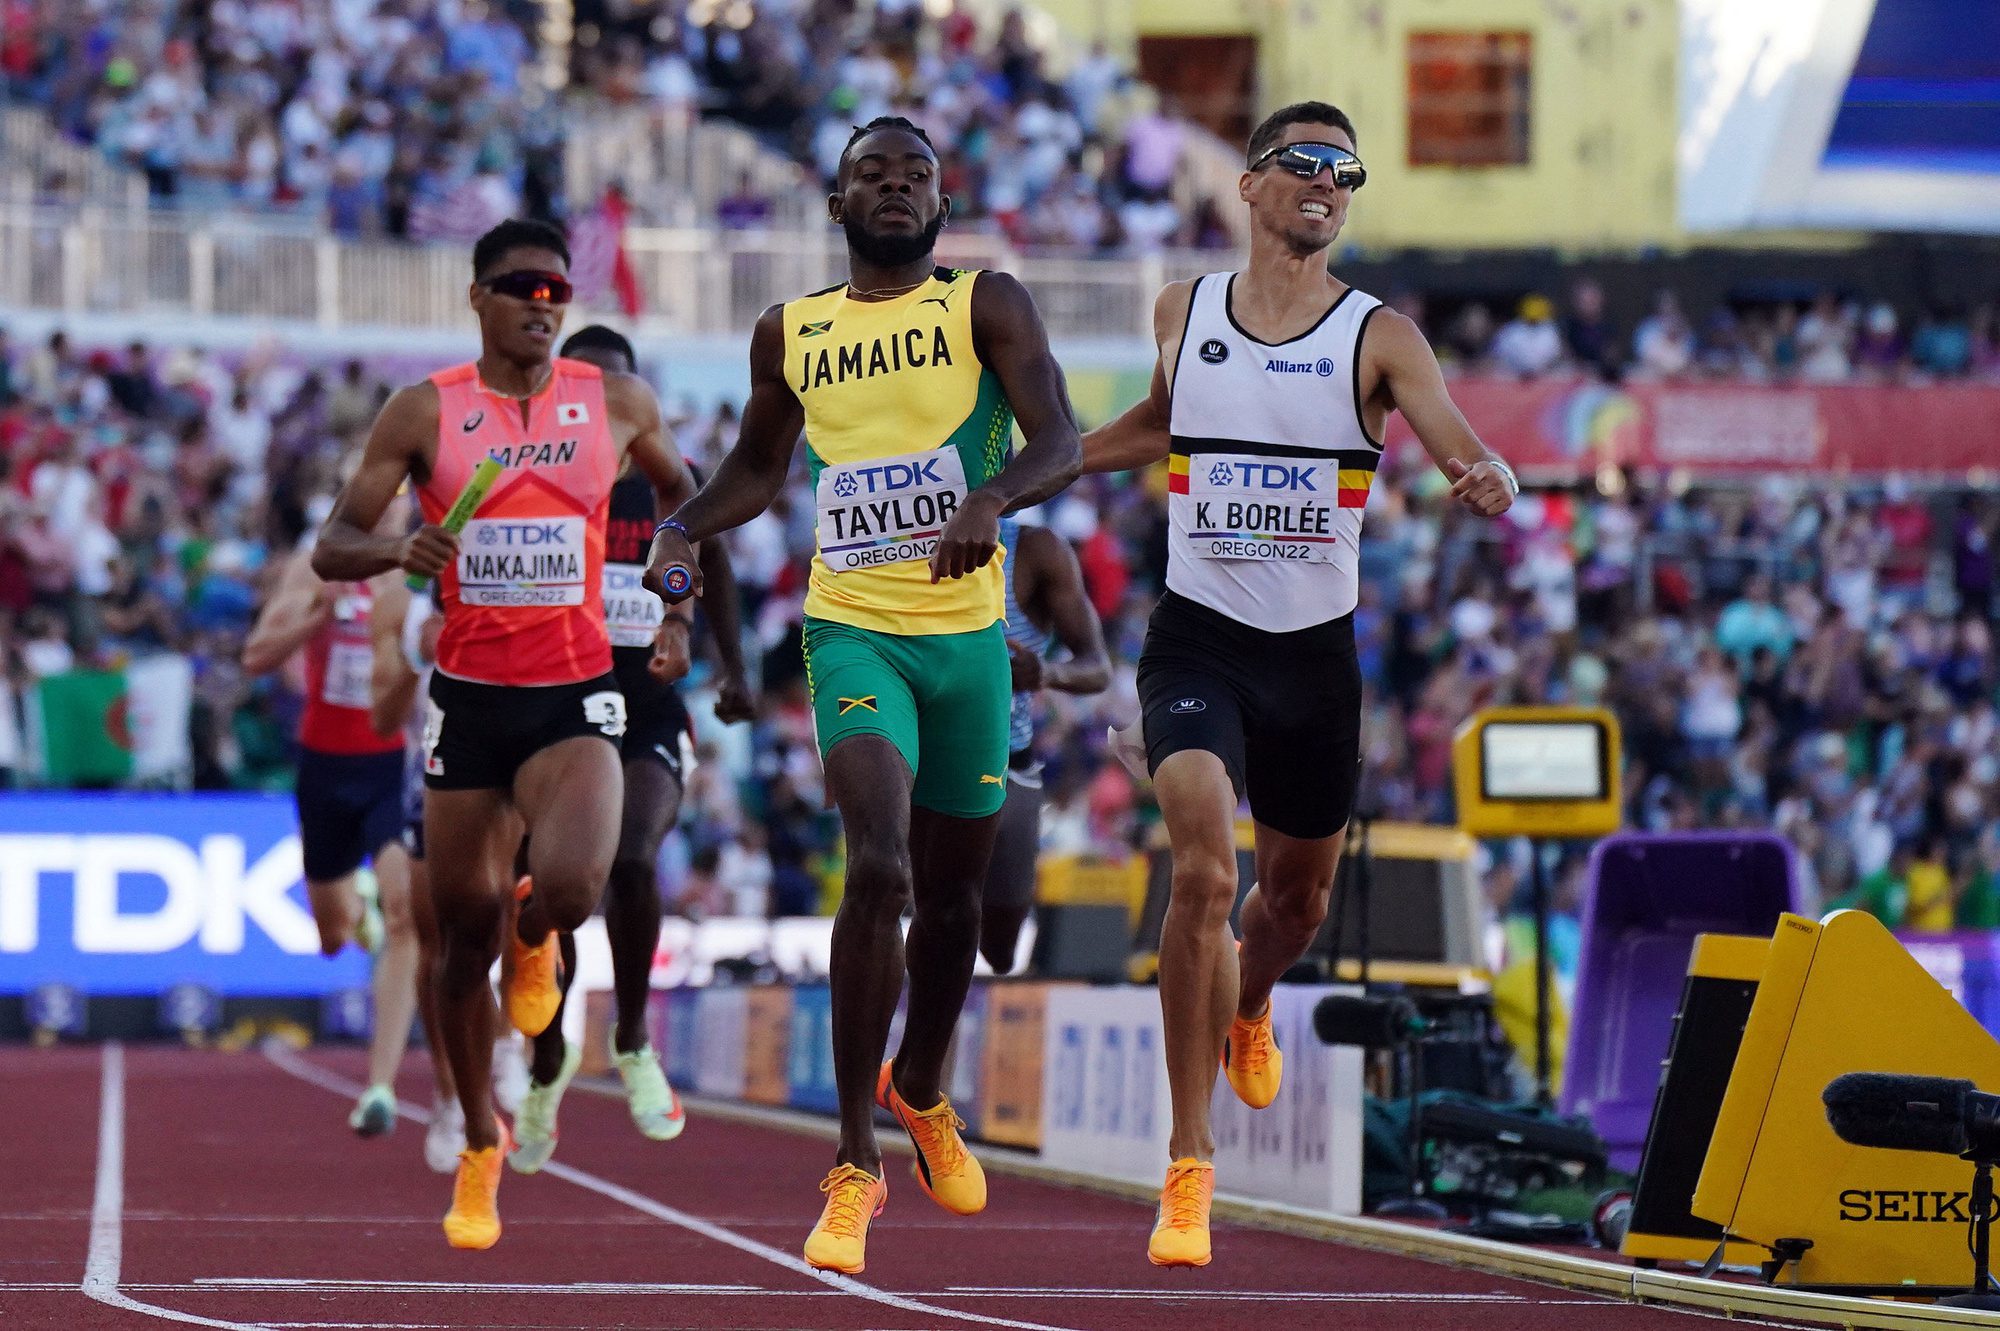 Kevin Borlée rushes to bronze, just ahead of Jamaican Christopher Taylor., Reuters